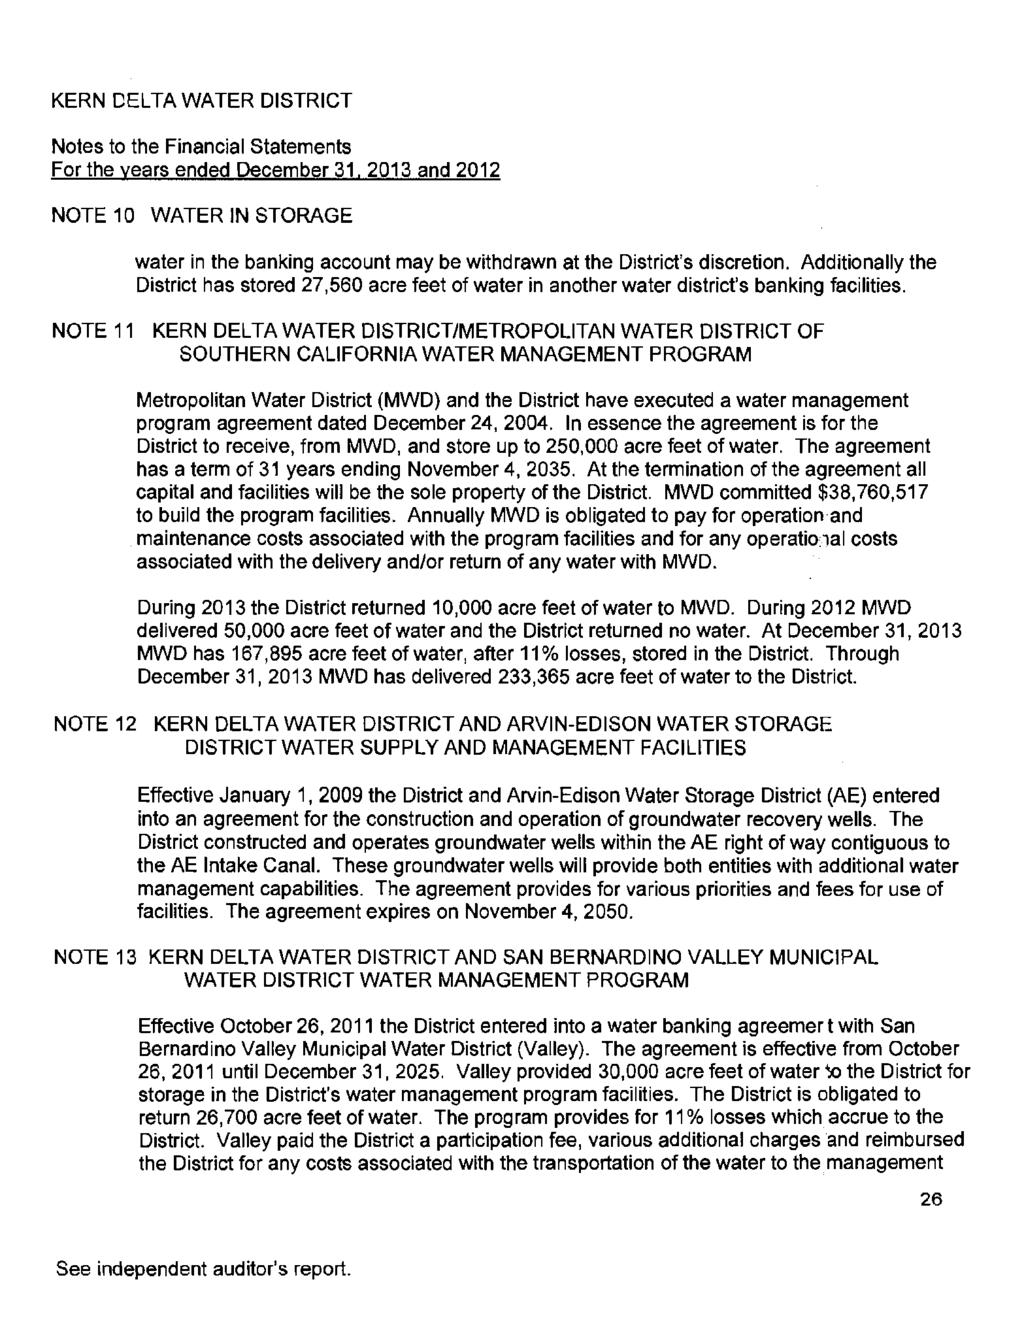 KERN DELTA WATER DISTRICT Notes to the Financial Statements For the years ended December 31,2013 and 2012 NOTE 10 WATER IN STORAGE water in the banking account may be withdrawn at the District's